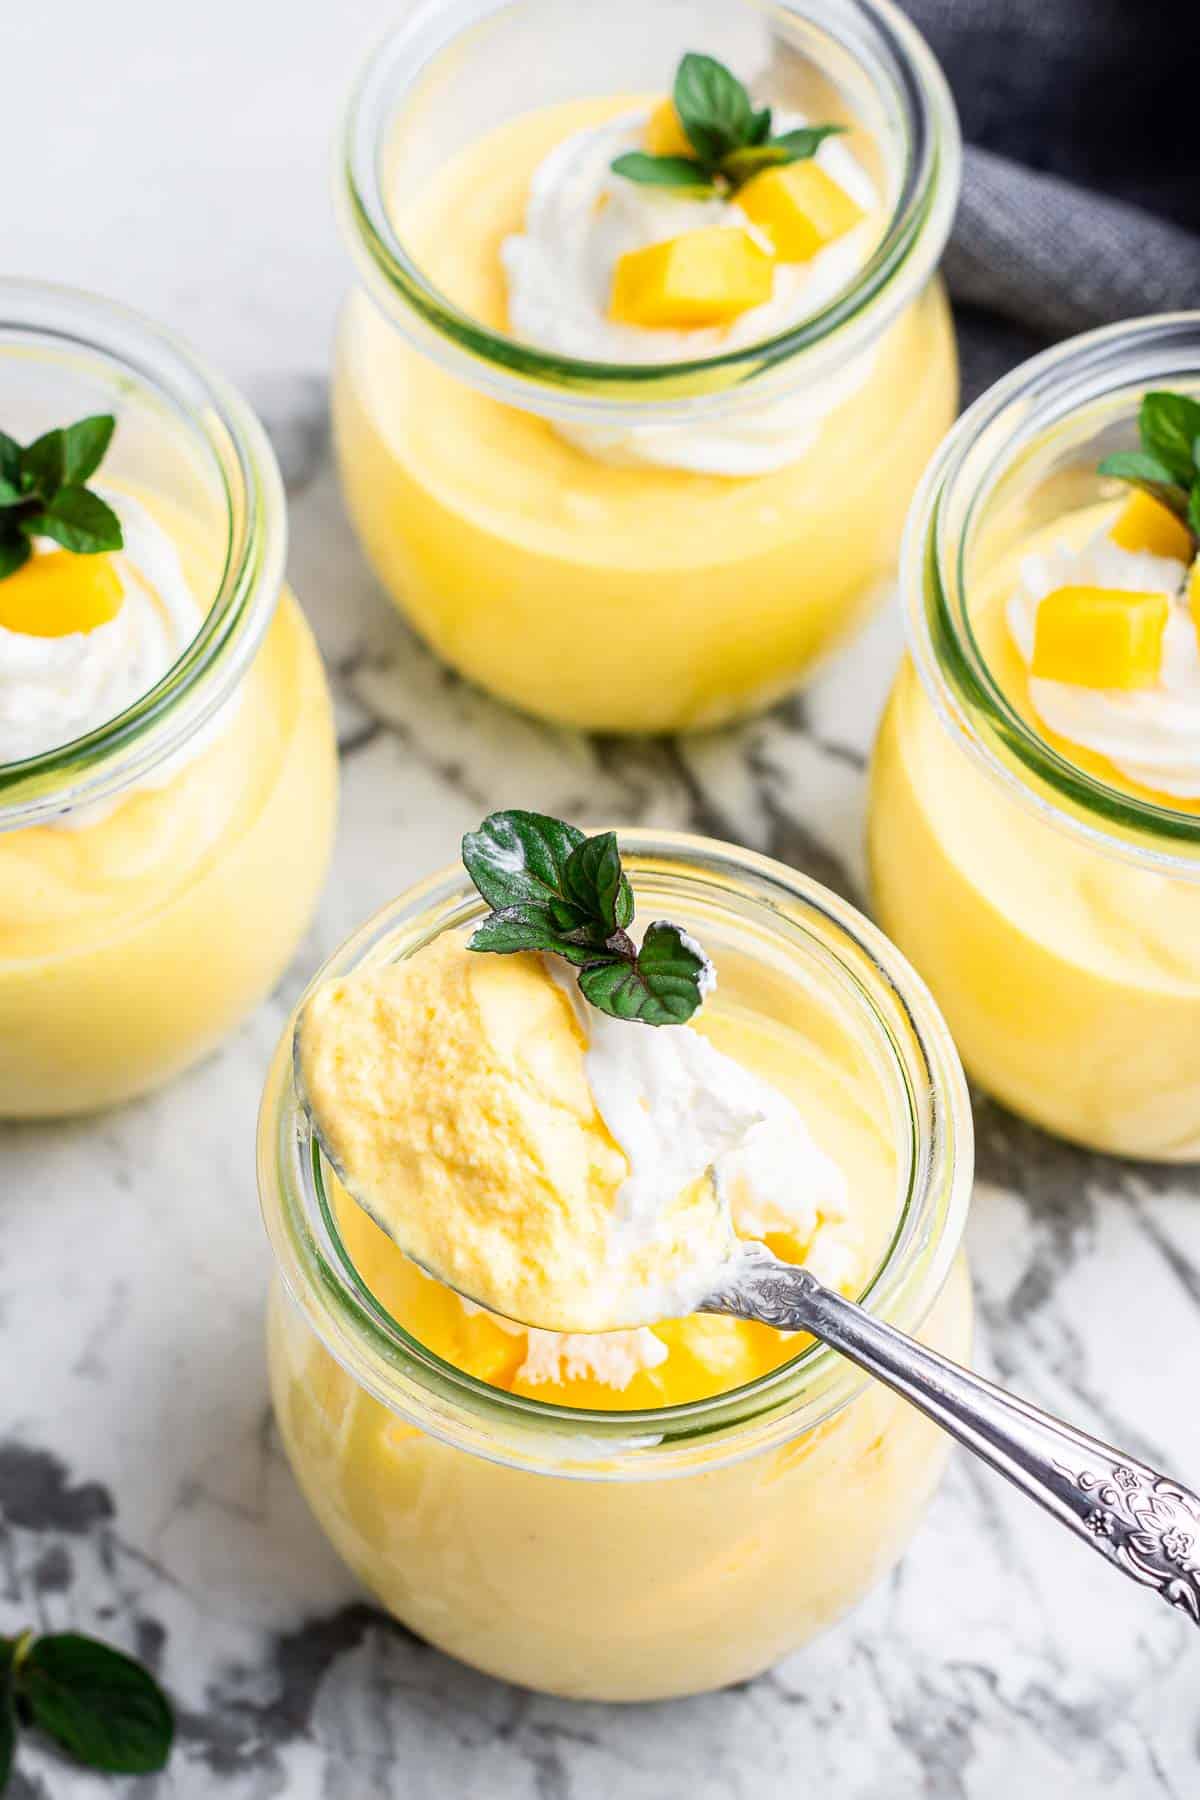 Mango mousse in jars with whipped cream and mint leaf on top.